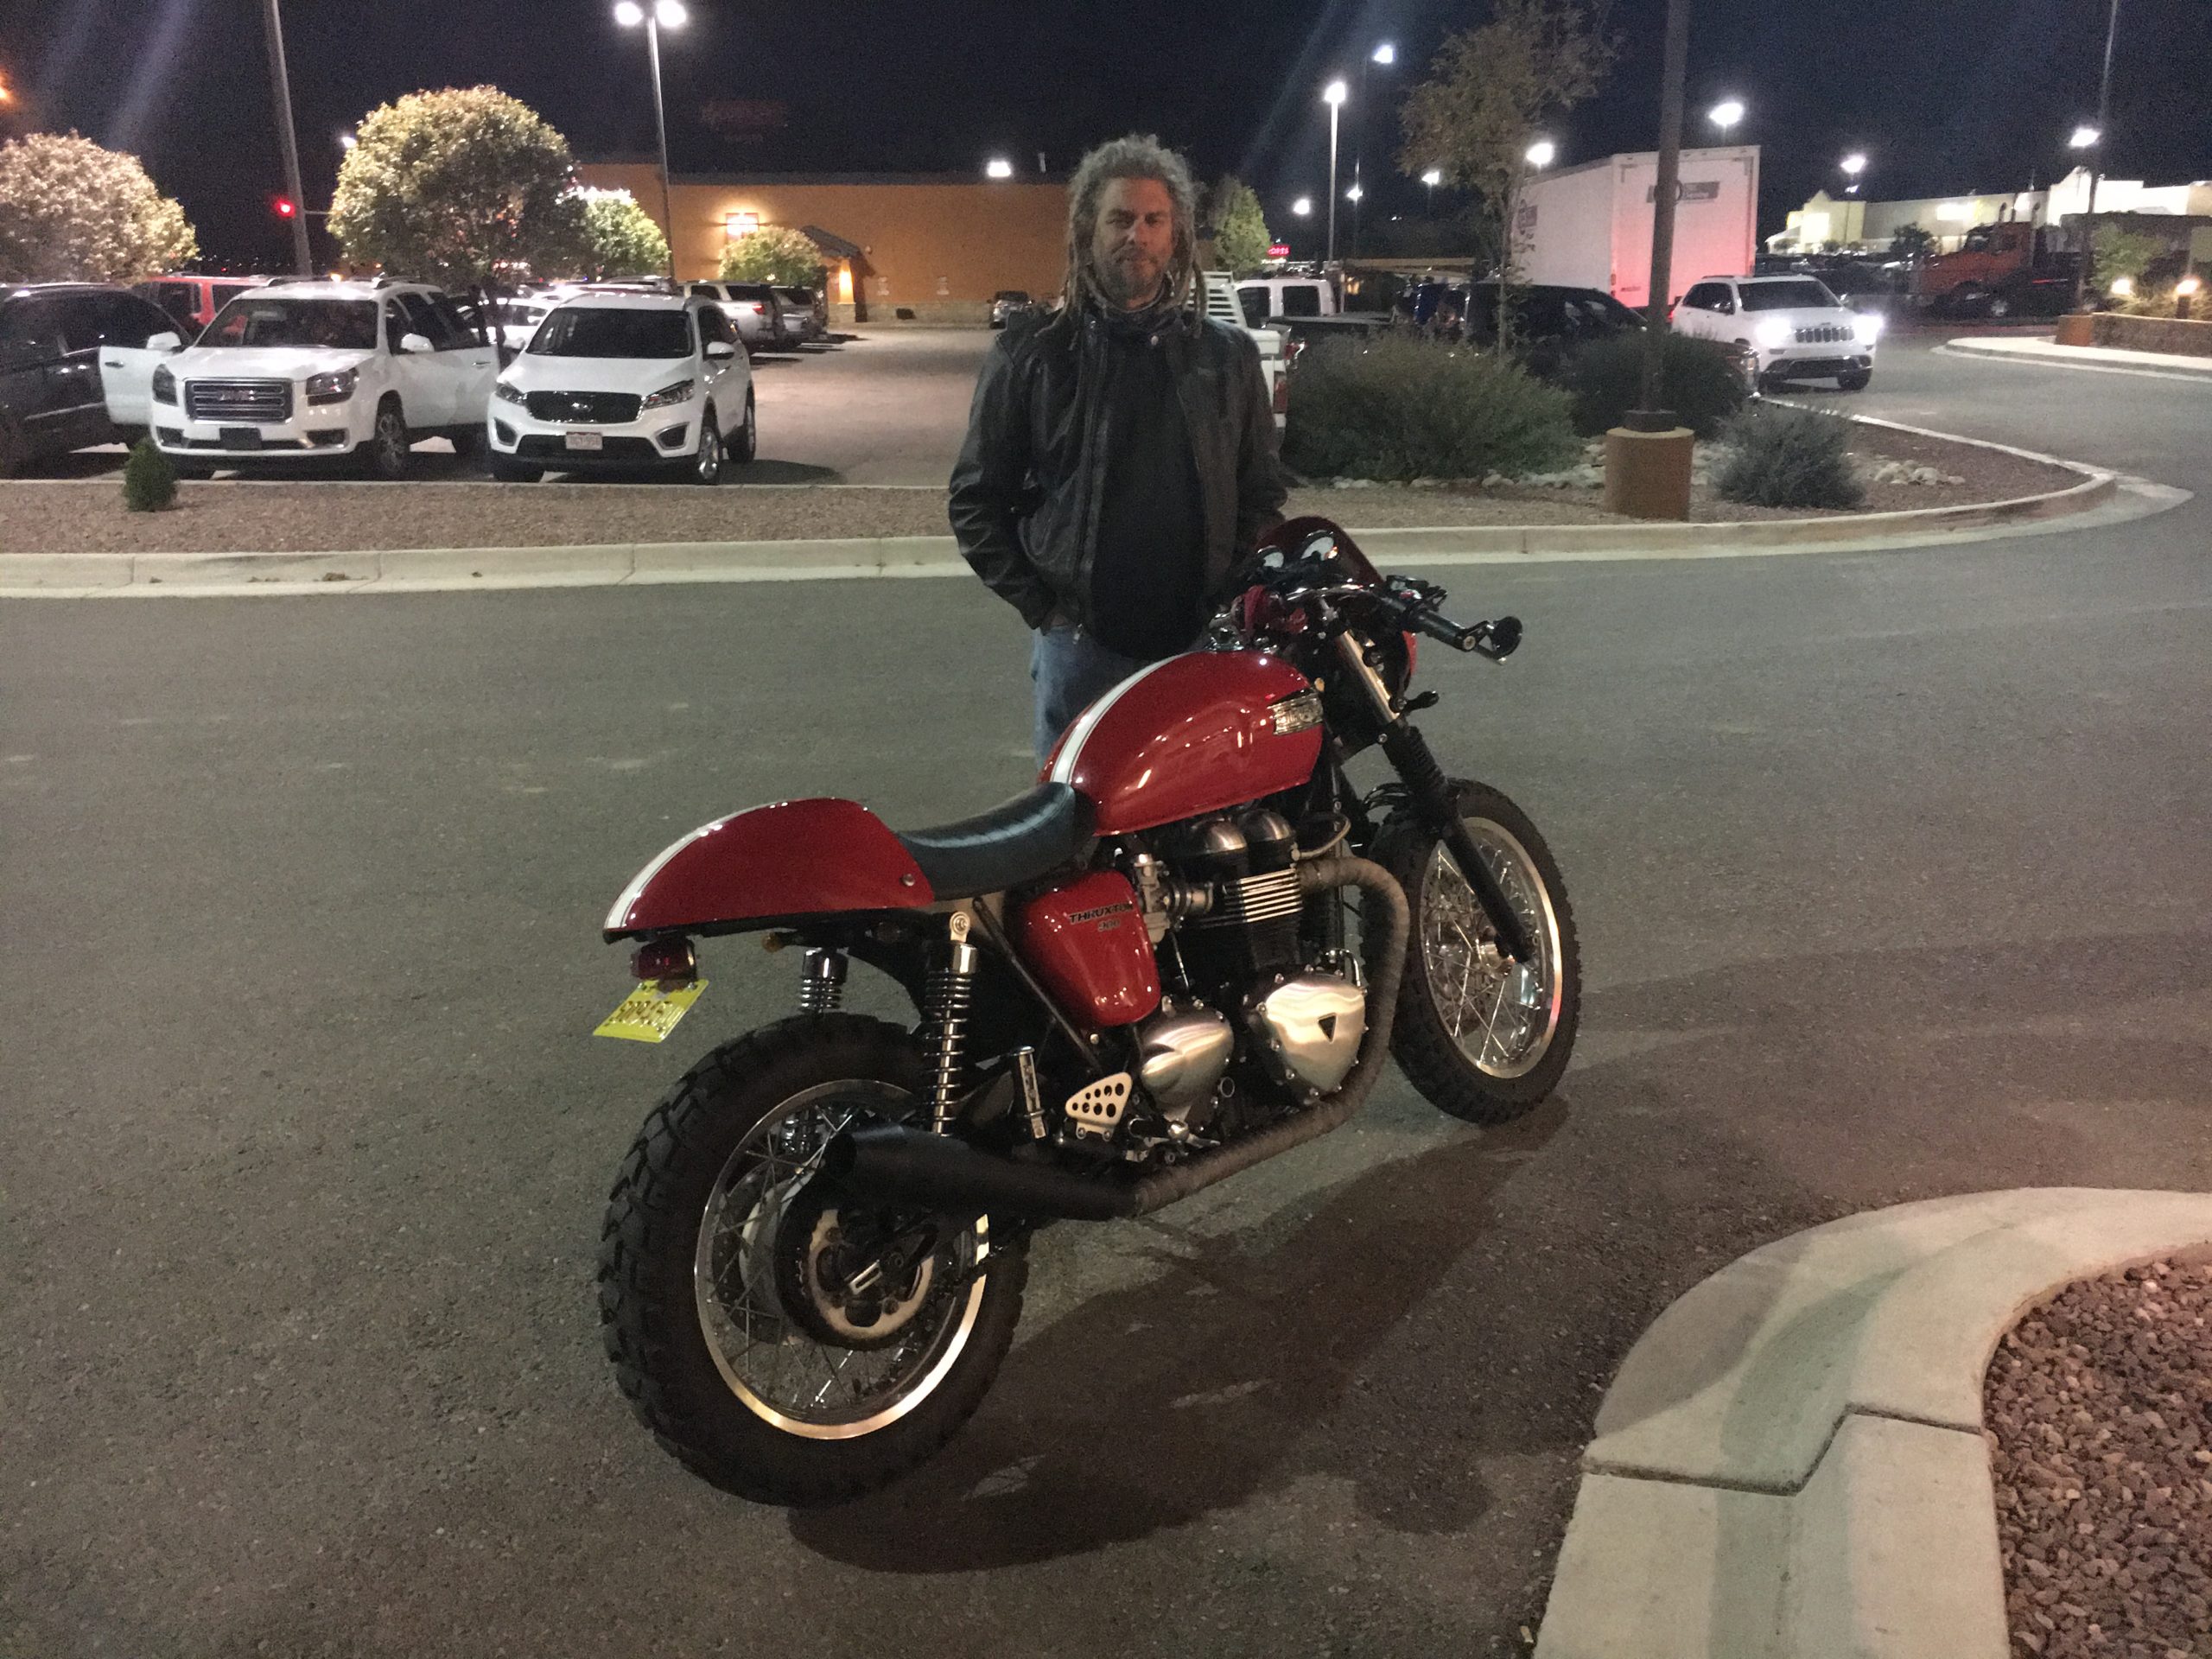 Man standing with motorcycle in parking lot